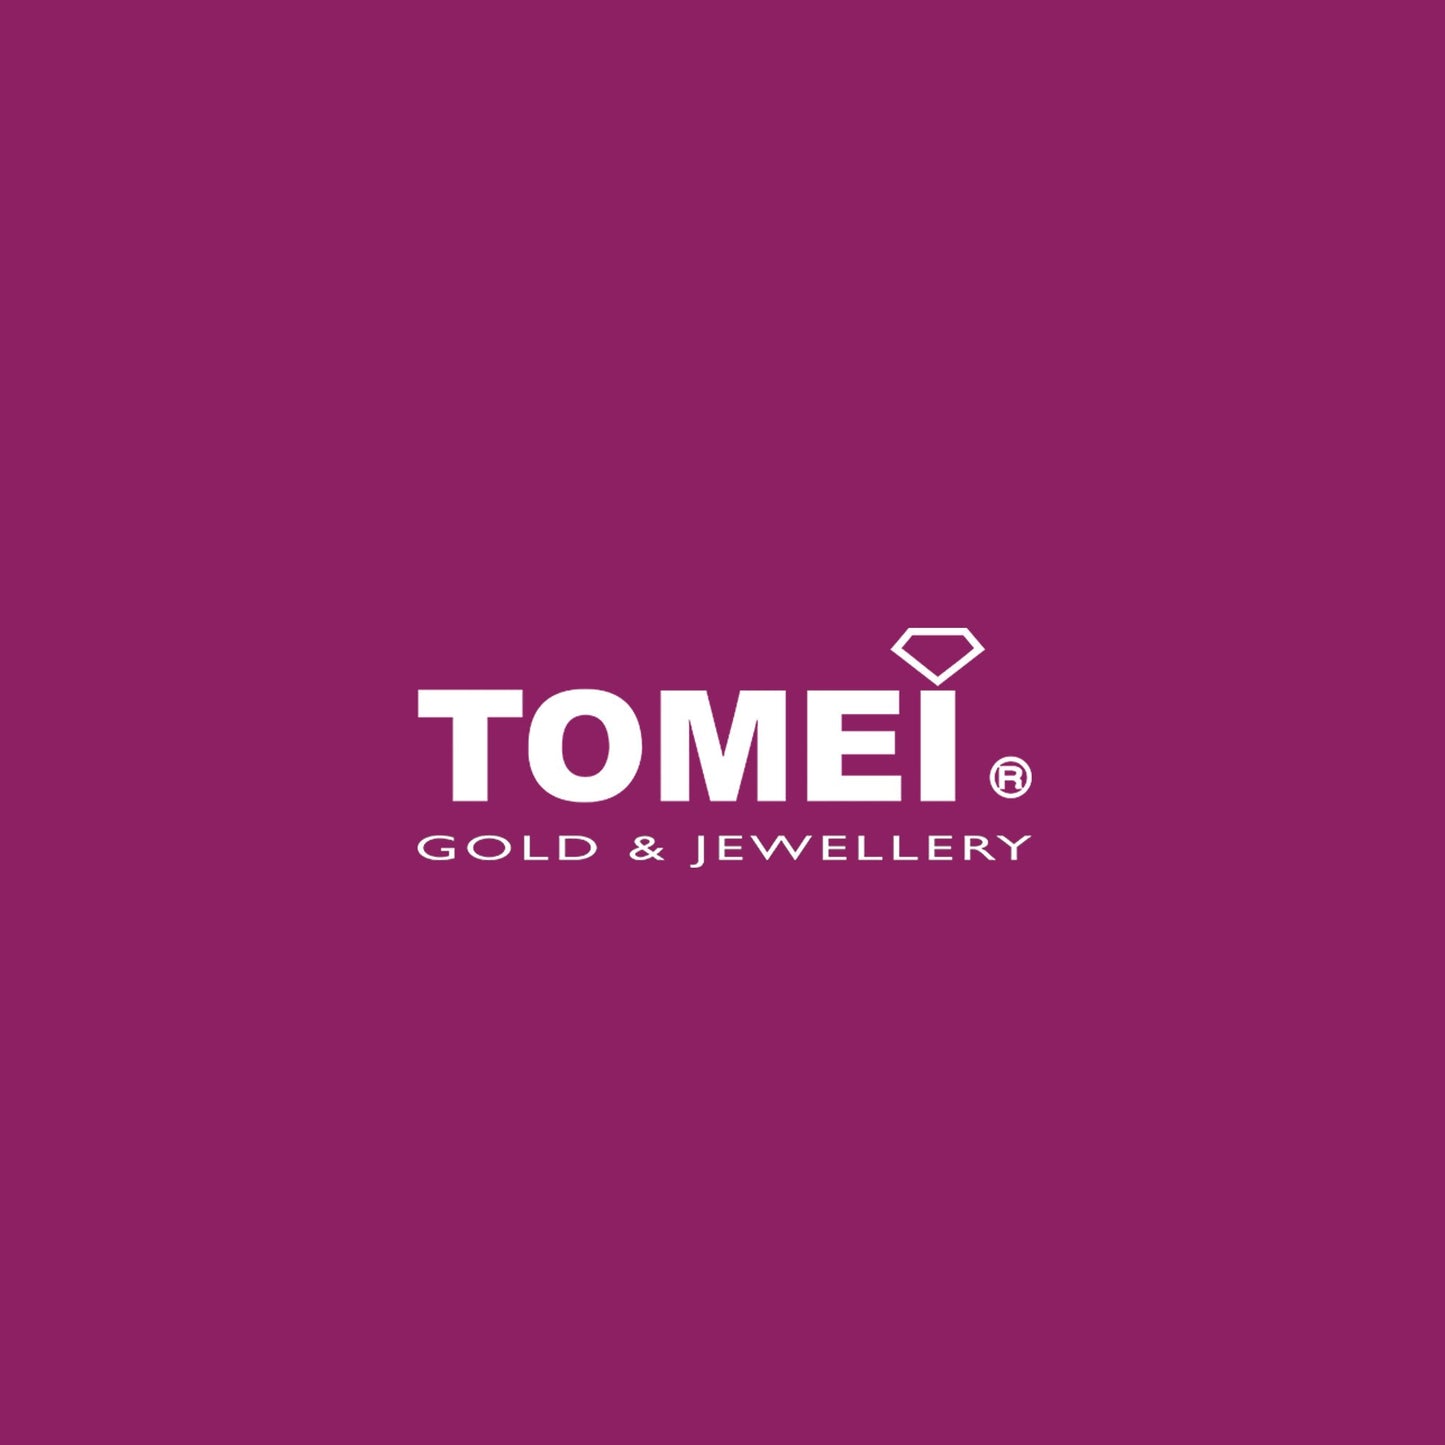 TOMEI Ring In The Season Collection, White Gold 750